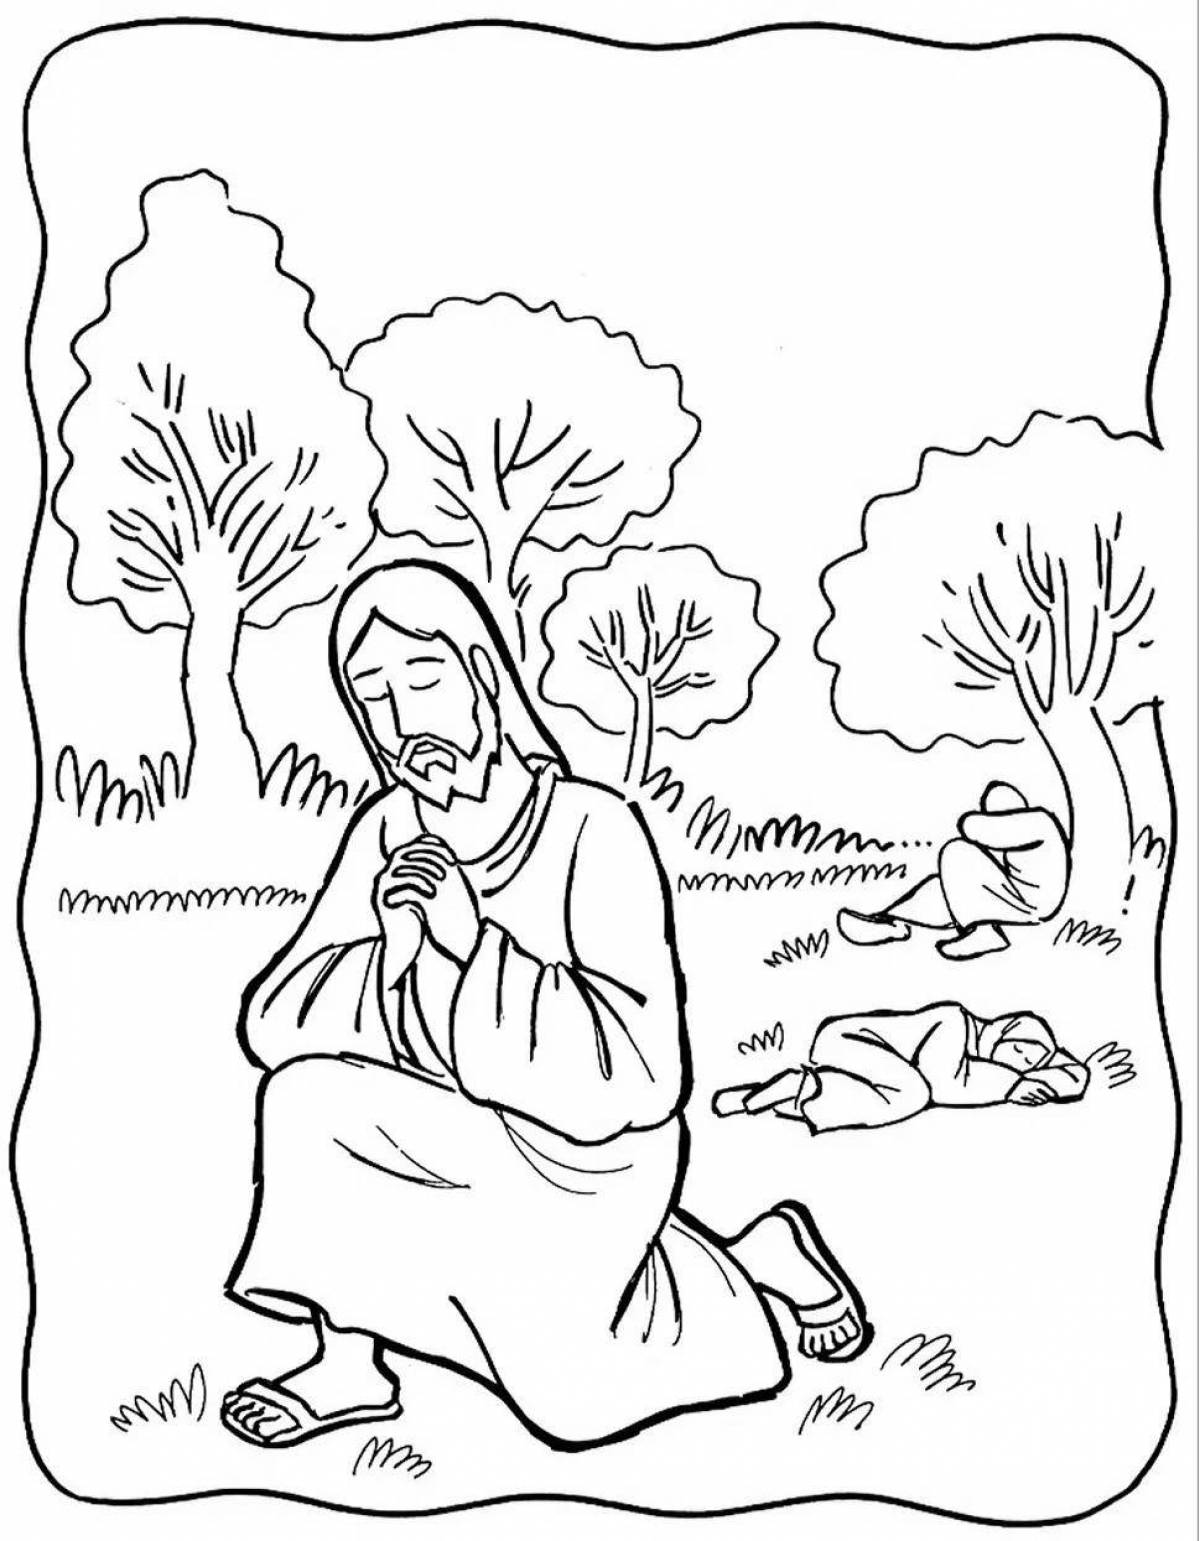 Peaceful Christian coloring page